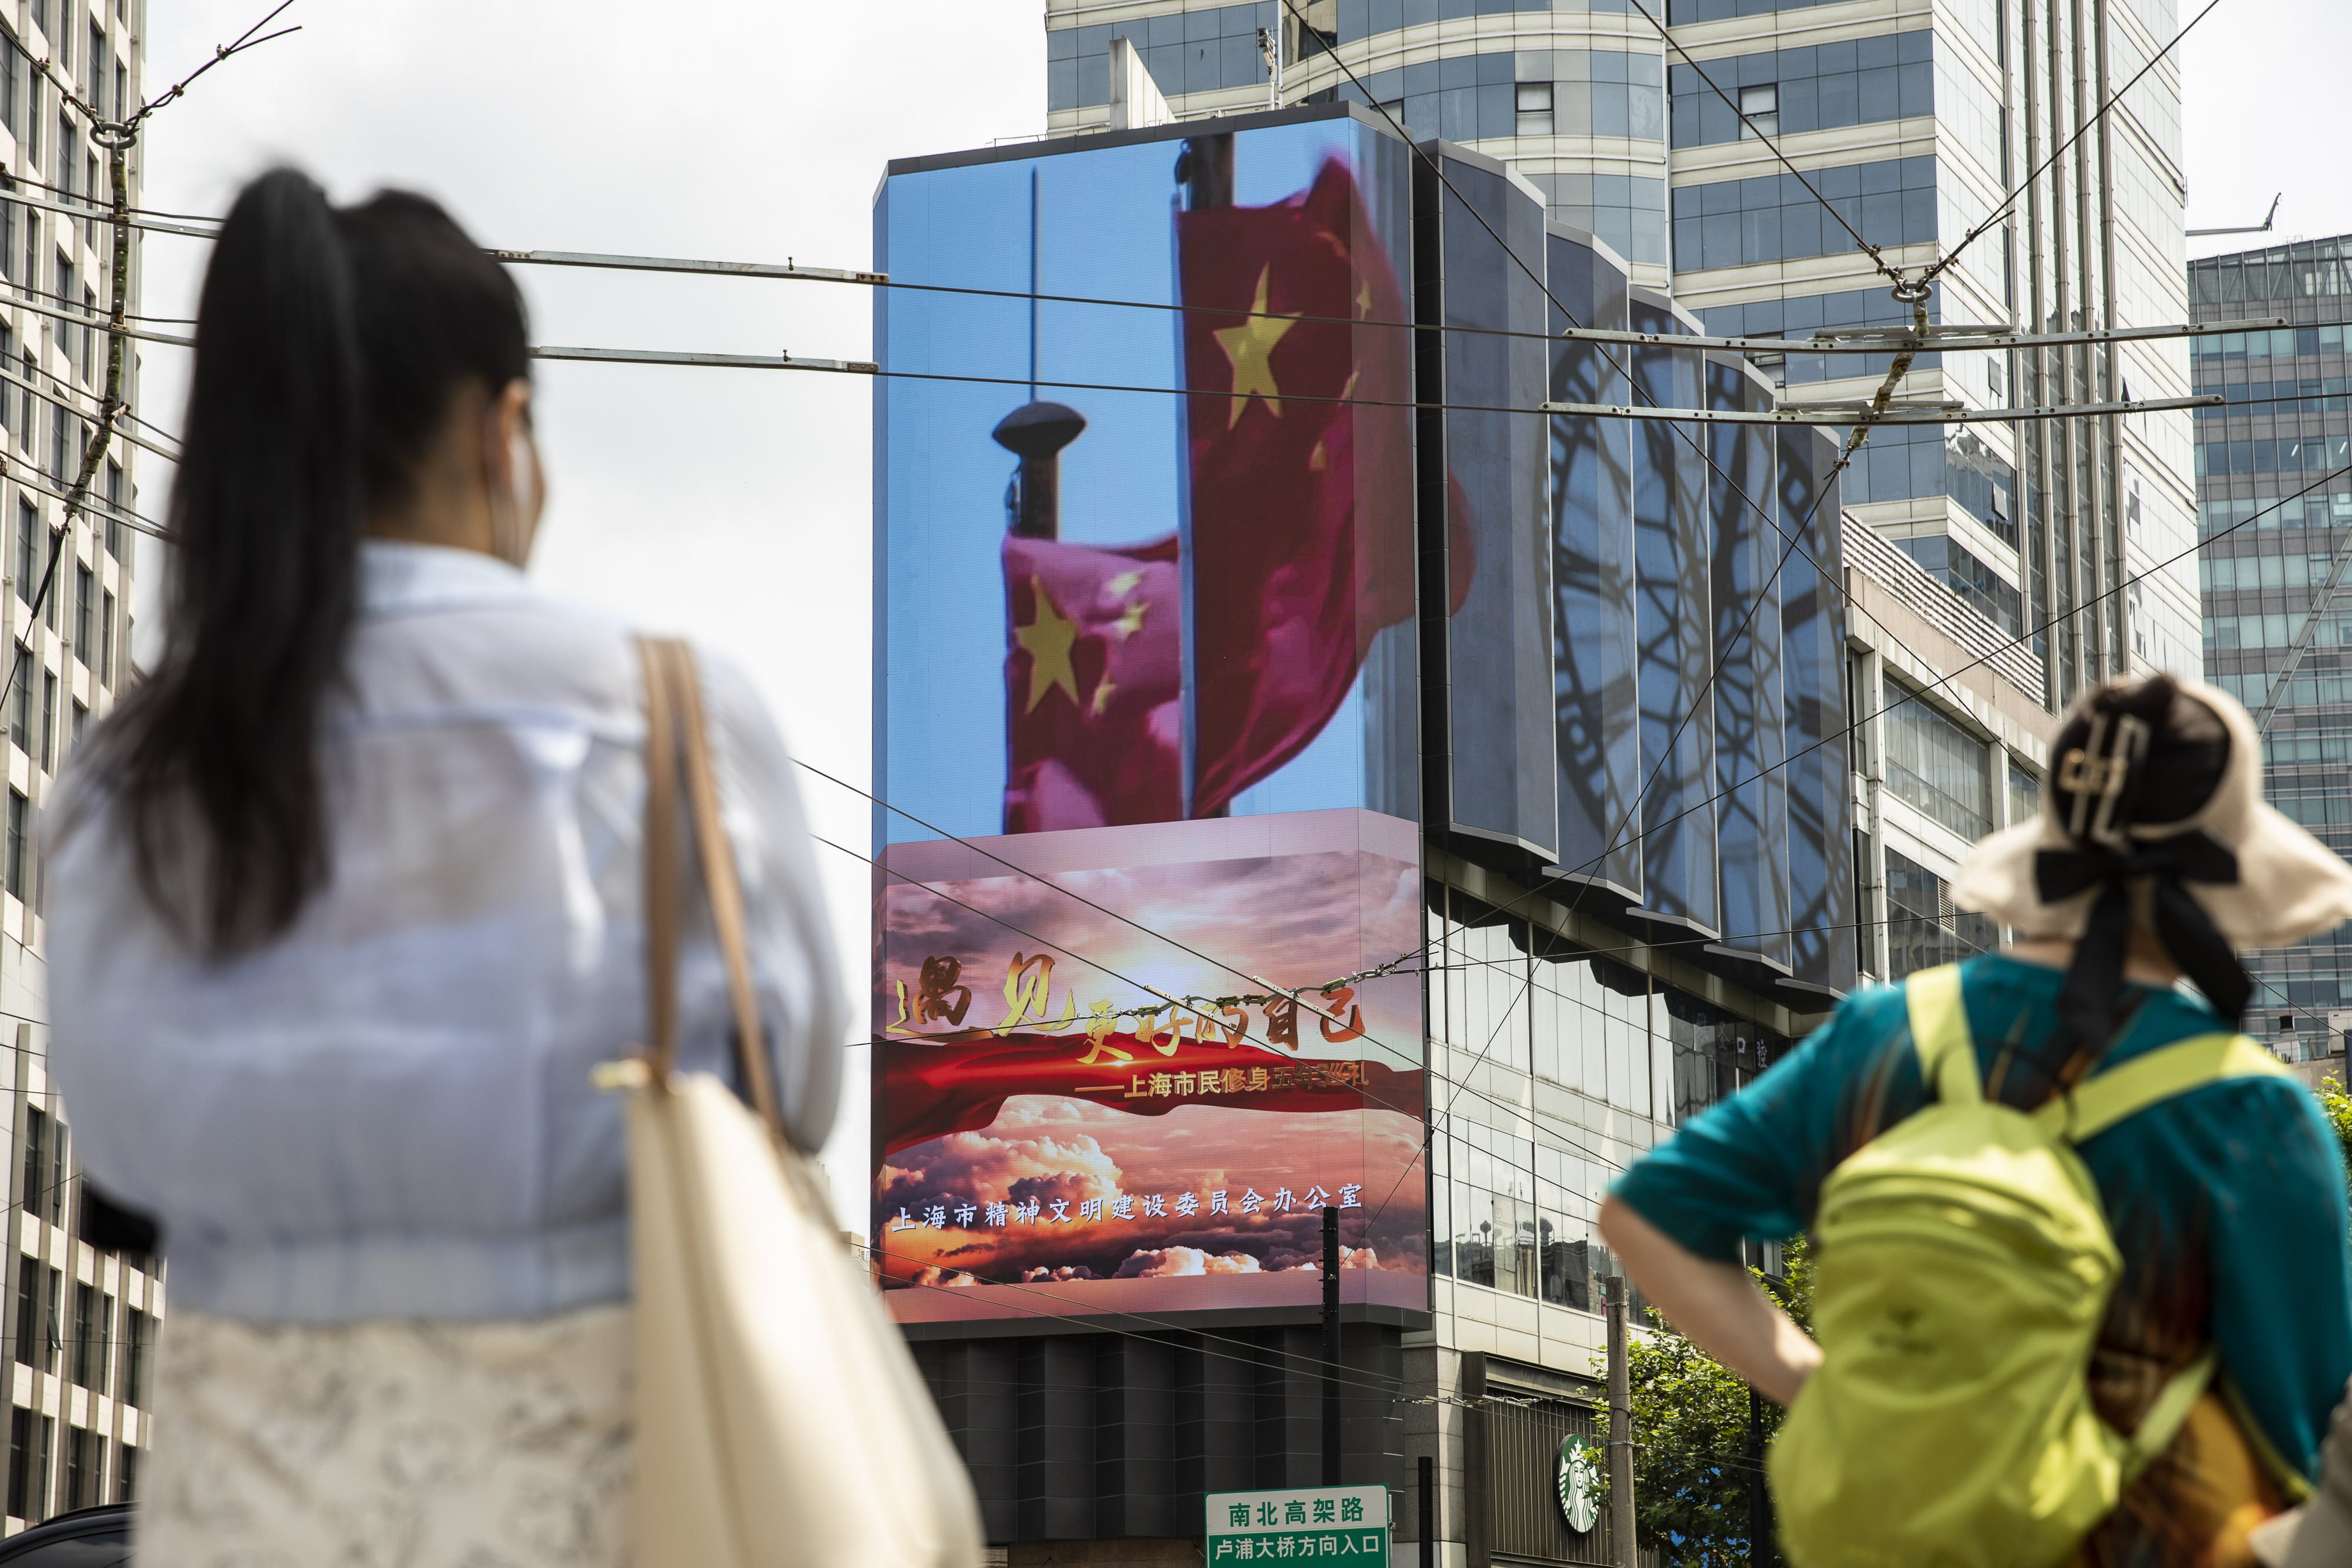 An advertising screen displays an image of Chinese flags in Shanghai on August 18. President Xi Jinping said China must pursue ‘common prosperity’, in which wealth is shared by all people, as a key feature of a modern economy while also curbing financial risks. Photo: Bloomberg